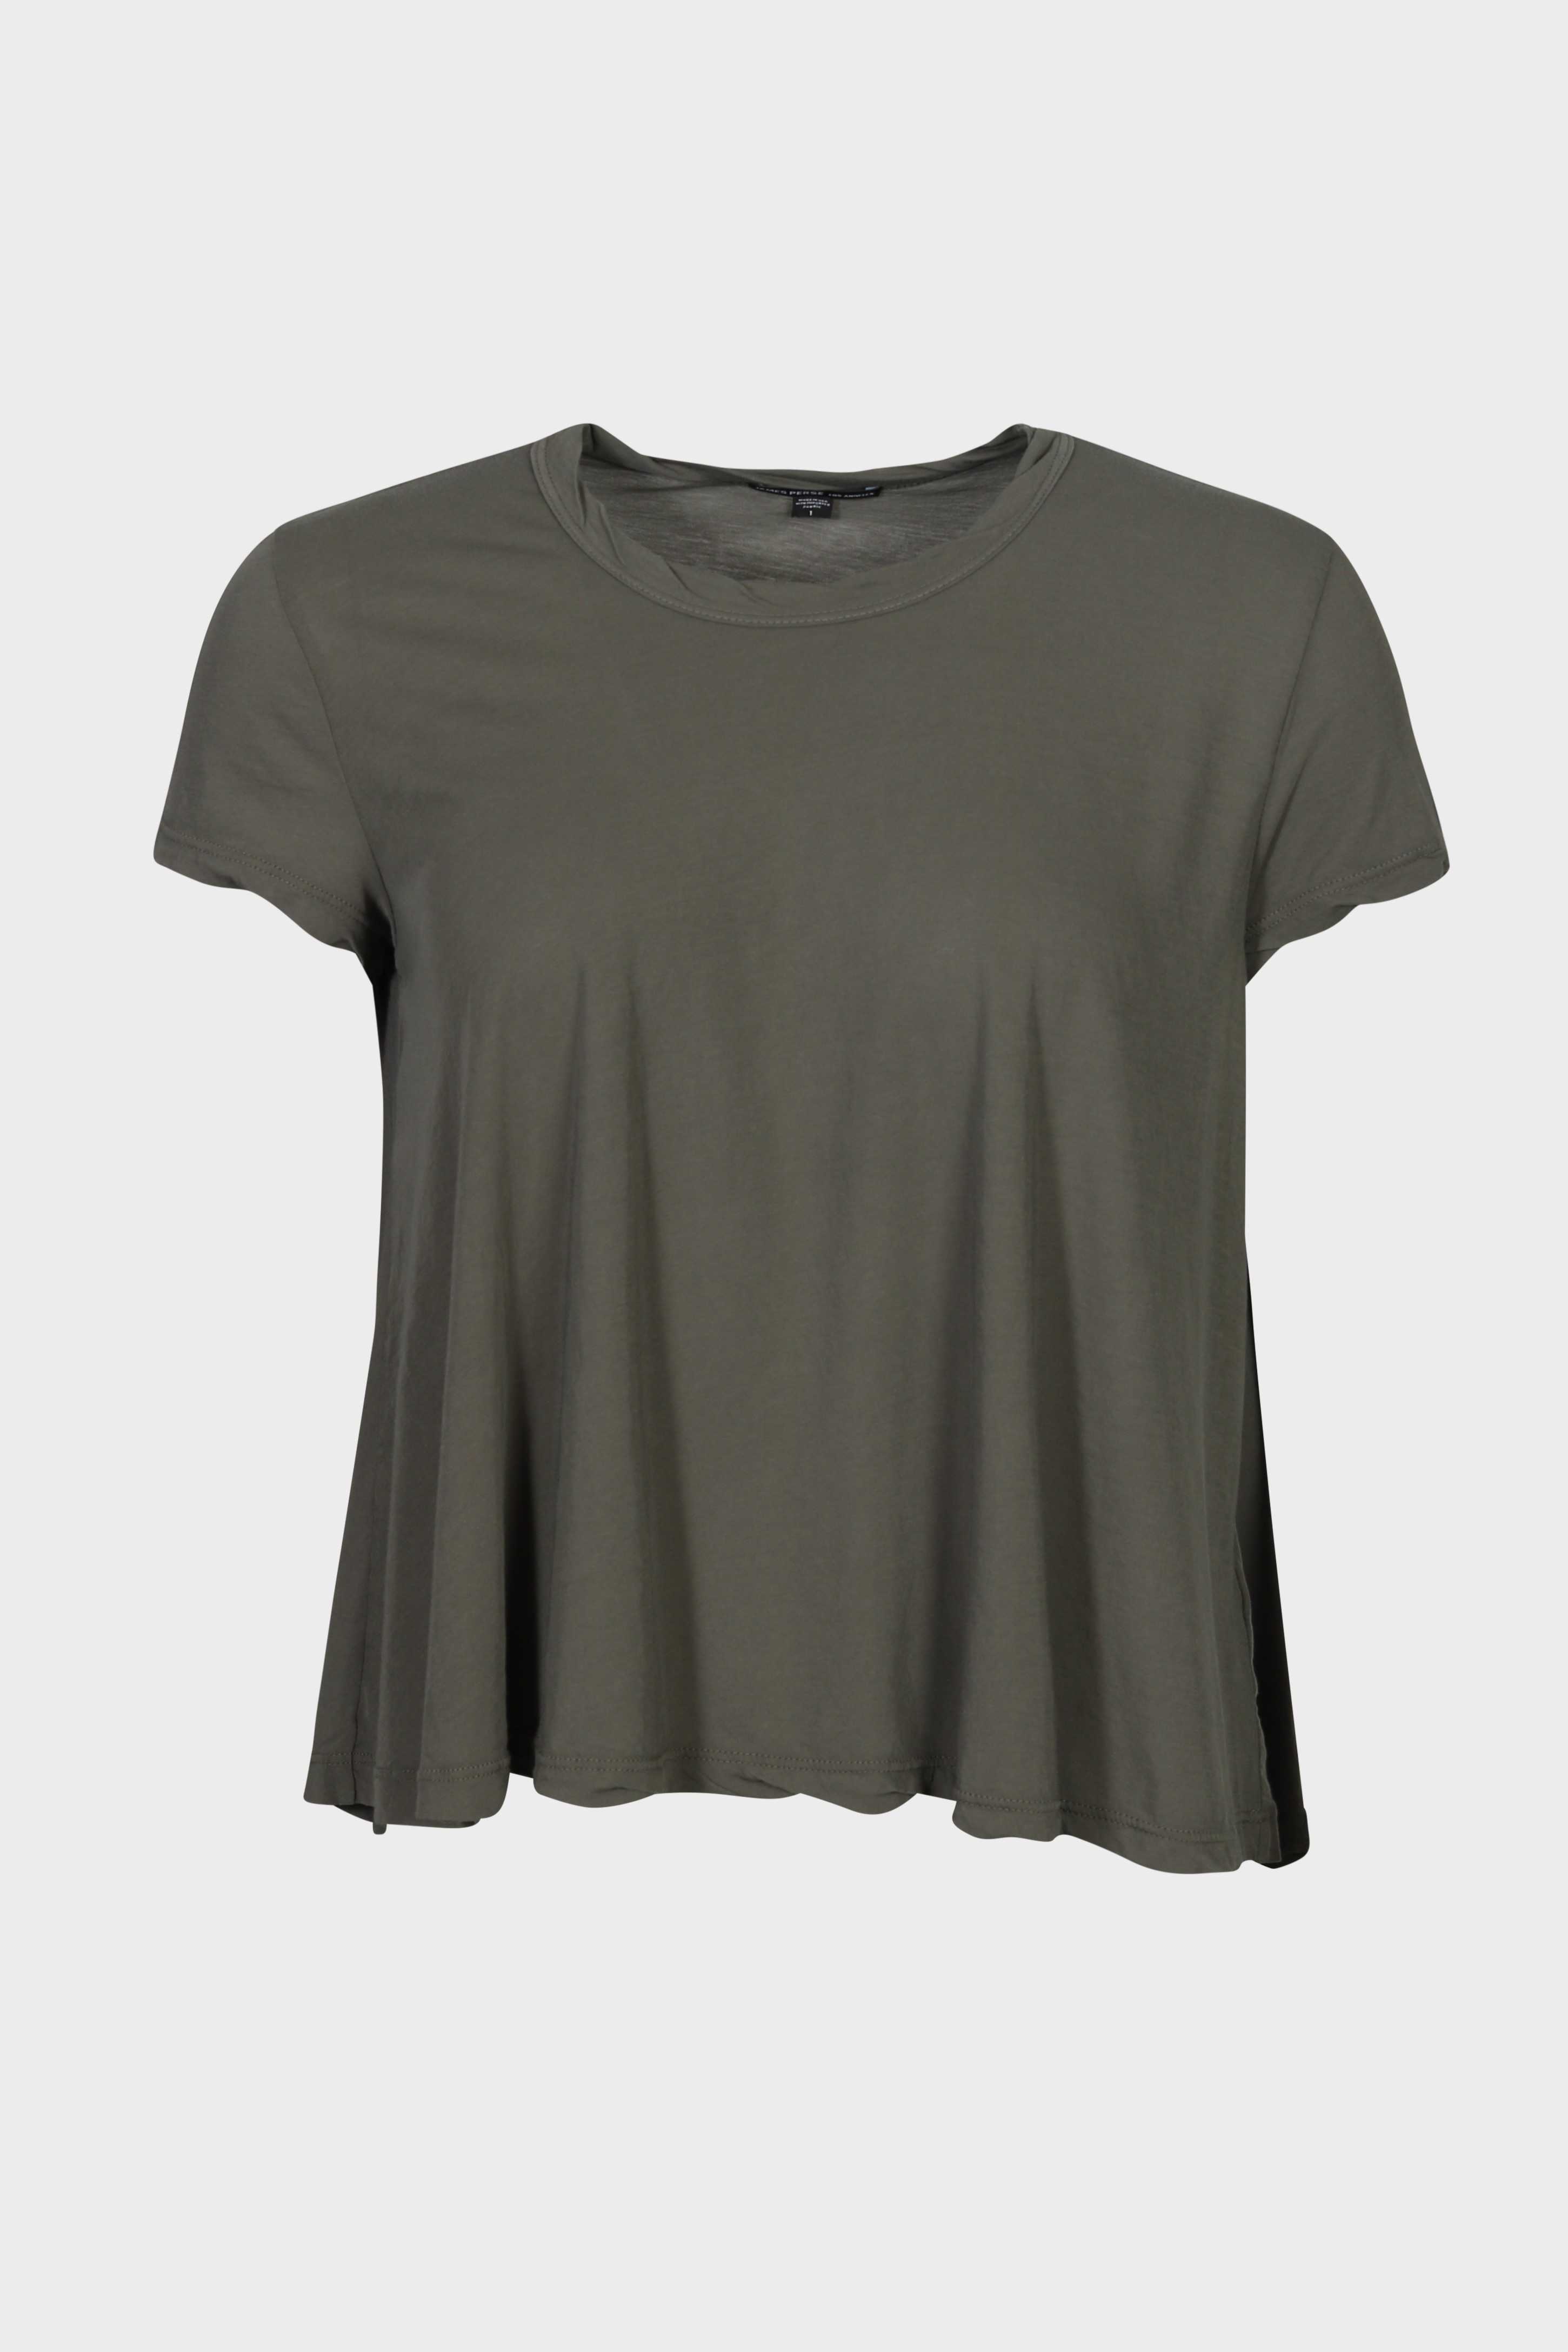 JAMES PERSE High Gauge A-Line T-Shirt in Olive